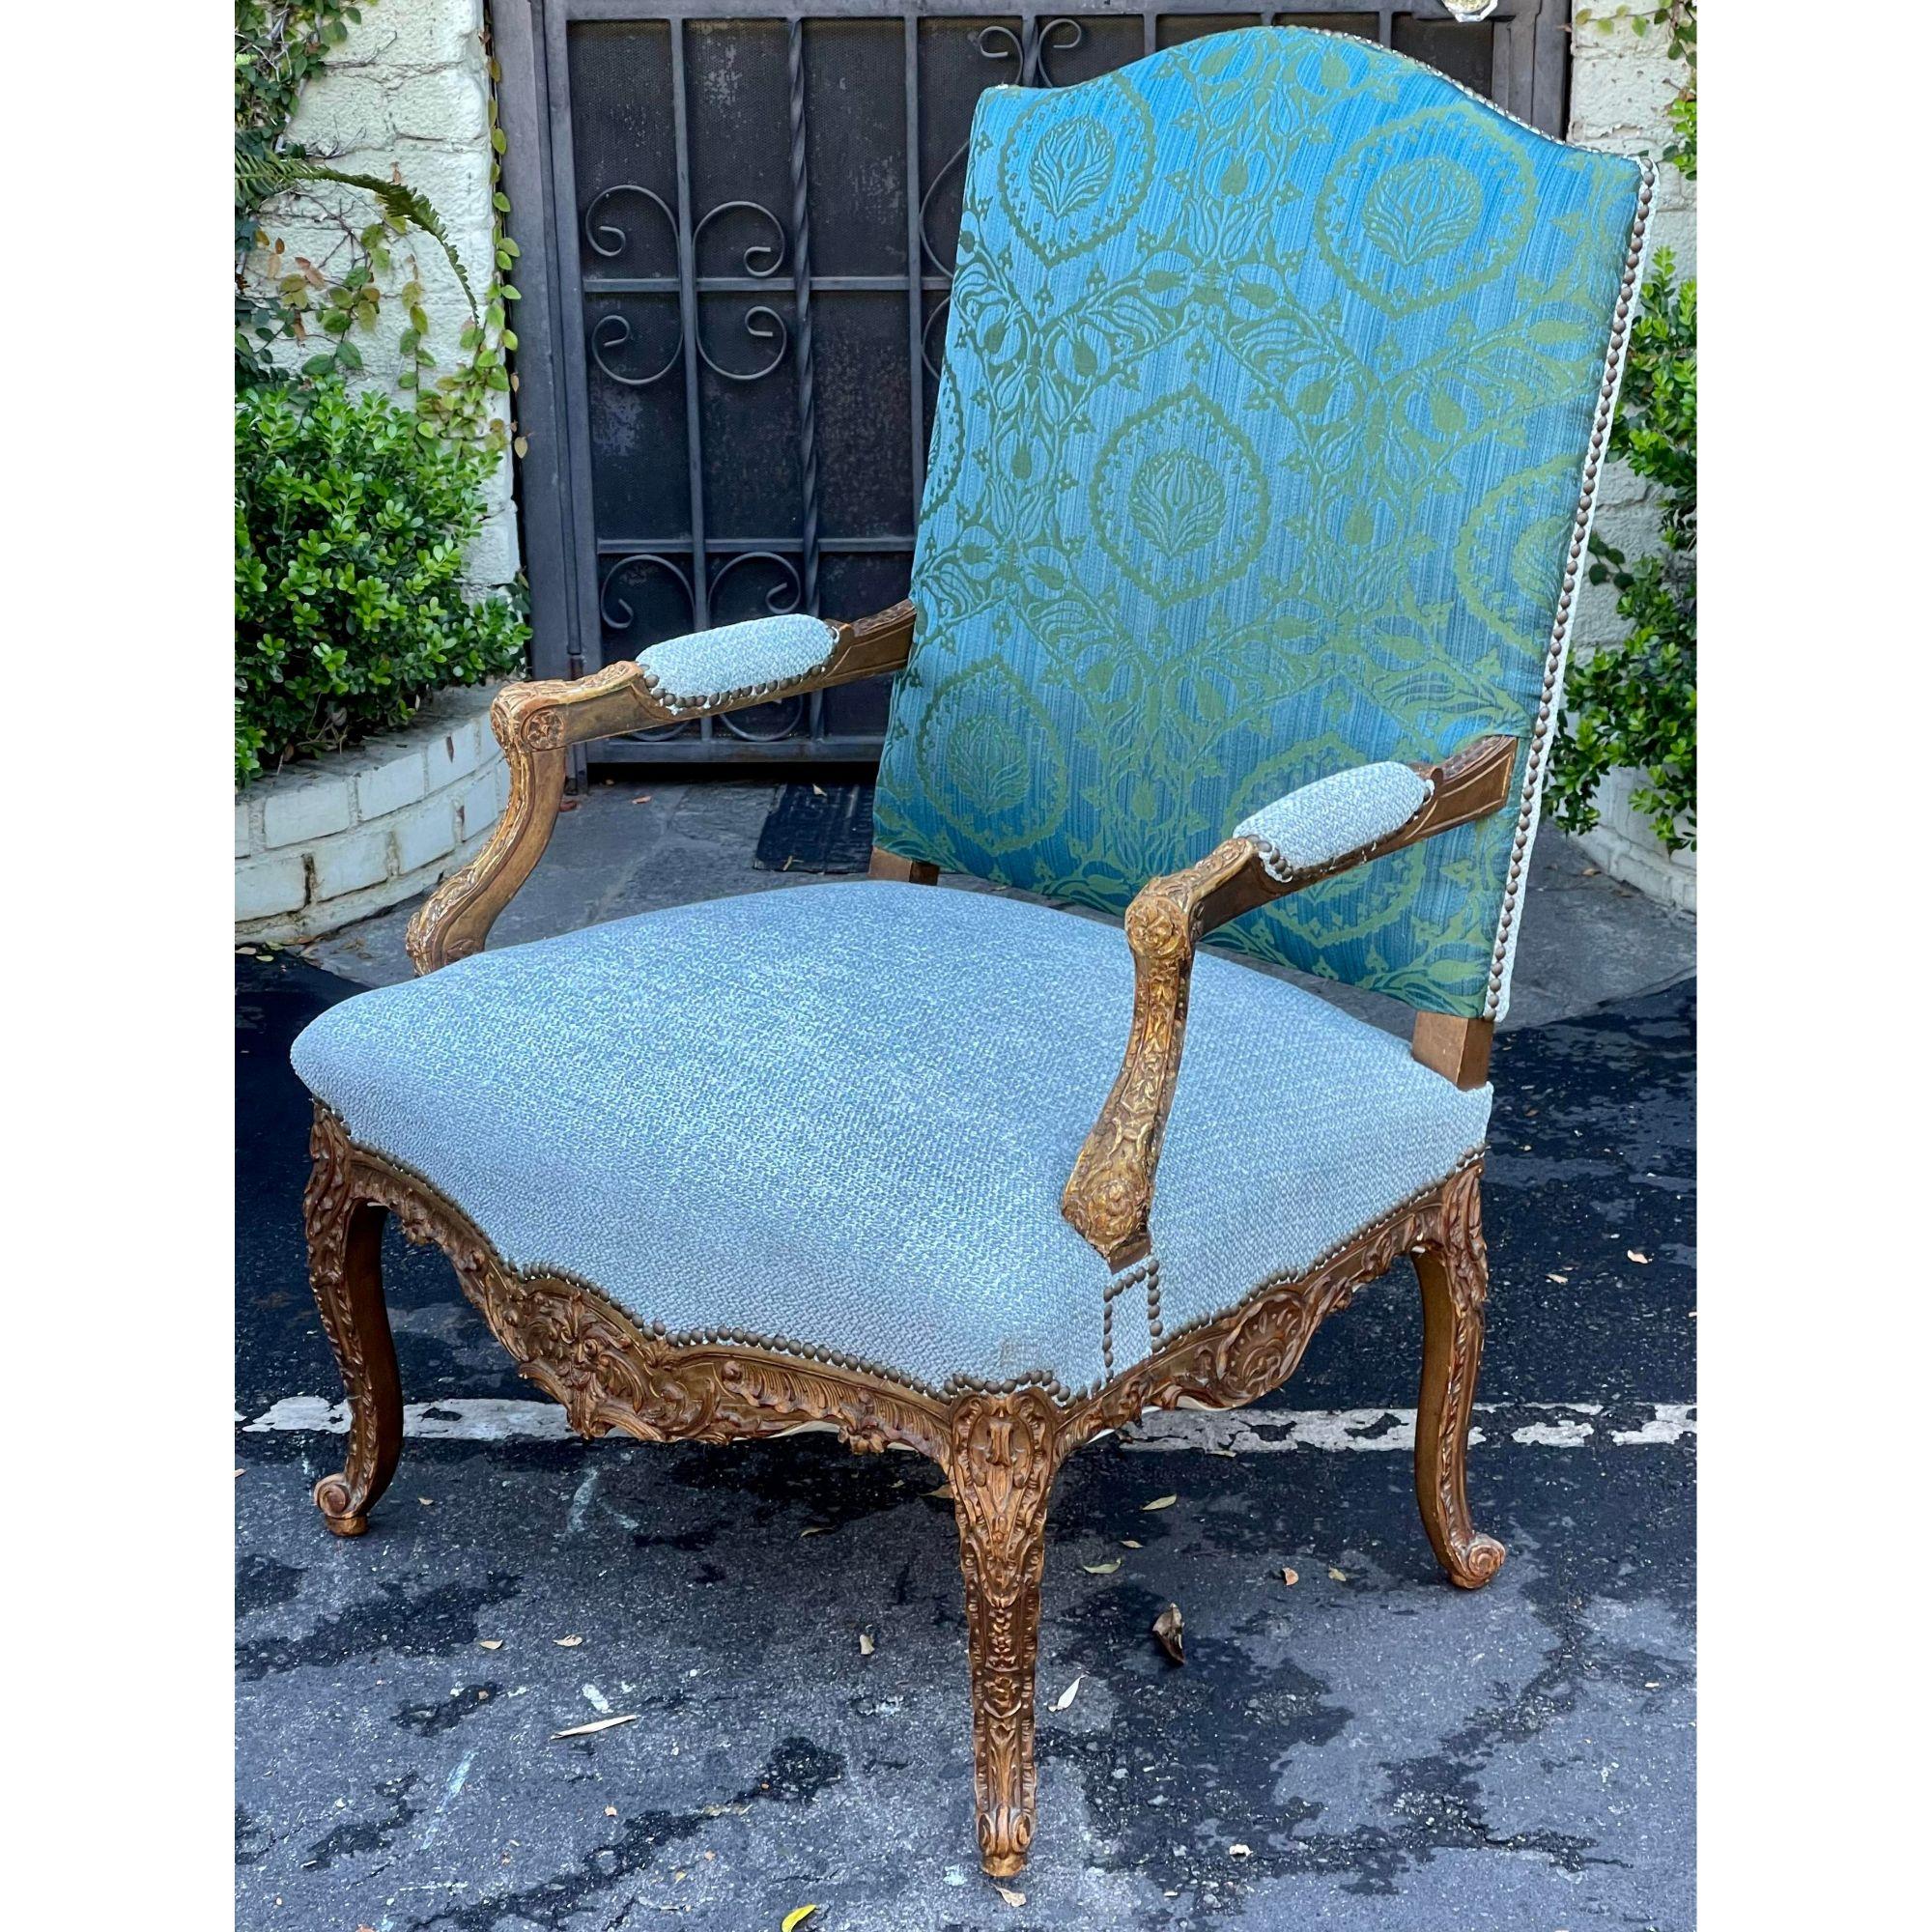 Antique Louis XV Style Giltwood Fauteuil arm chair.
The lumbar pillow is available but is not included.

Additional information:
Materials: Giltwood
Color: Blue
Period: 19th Century
Styles: Louis XV
Number of Seats: 1
Item Type: Vintage,